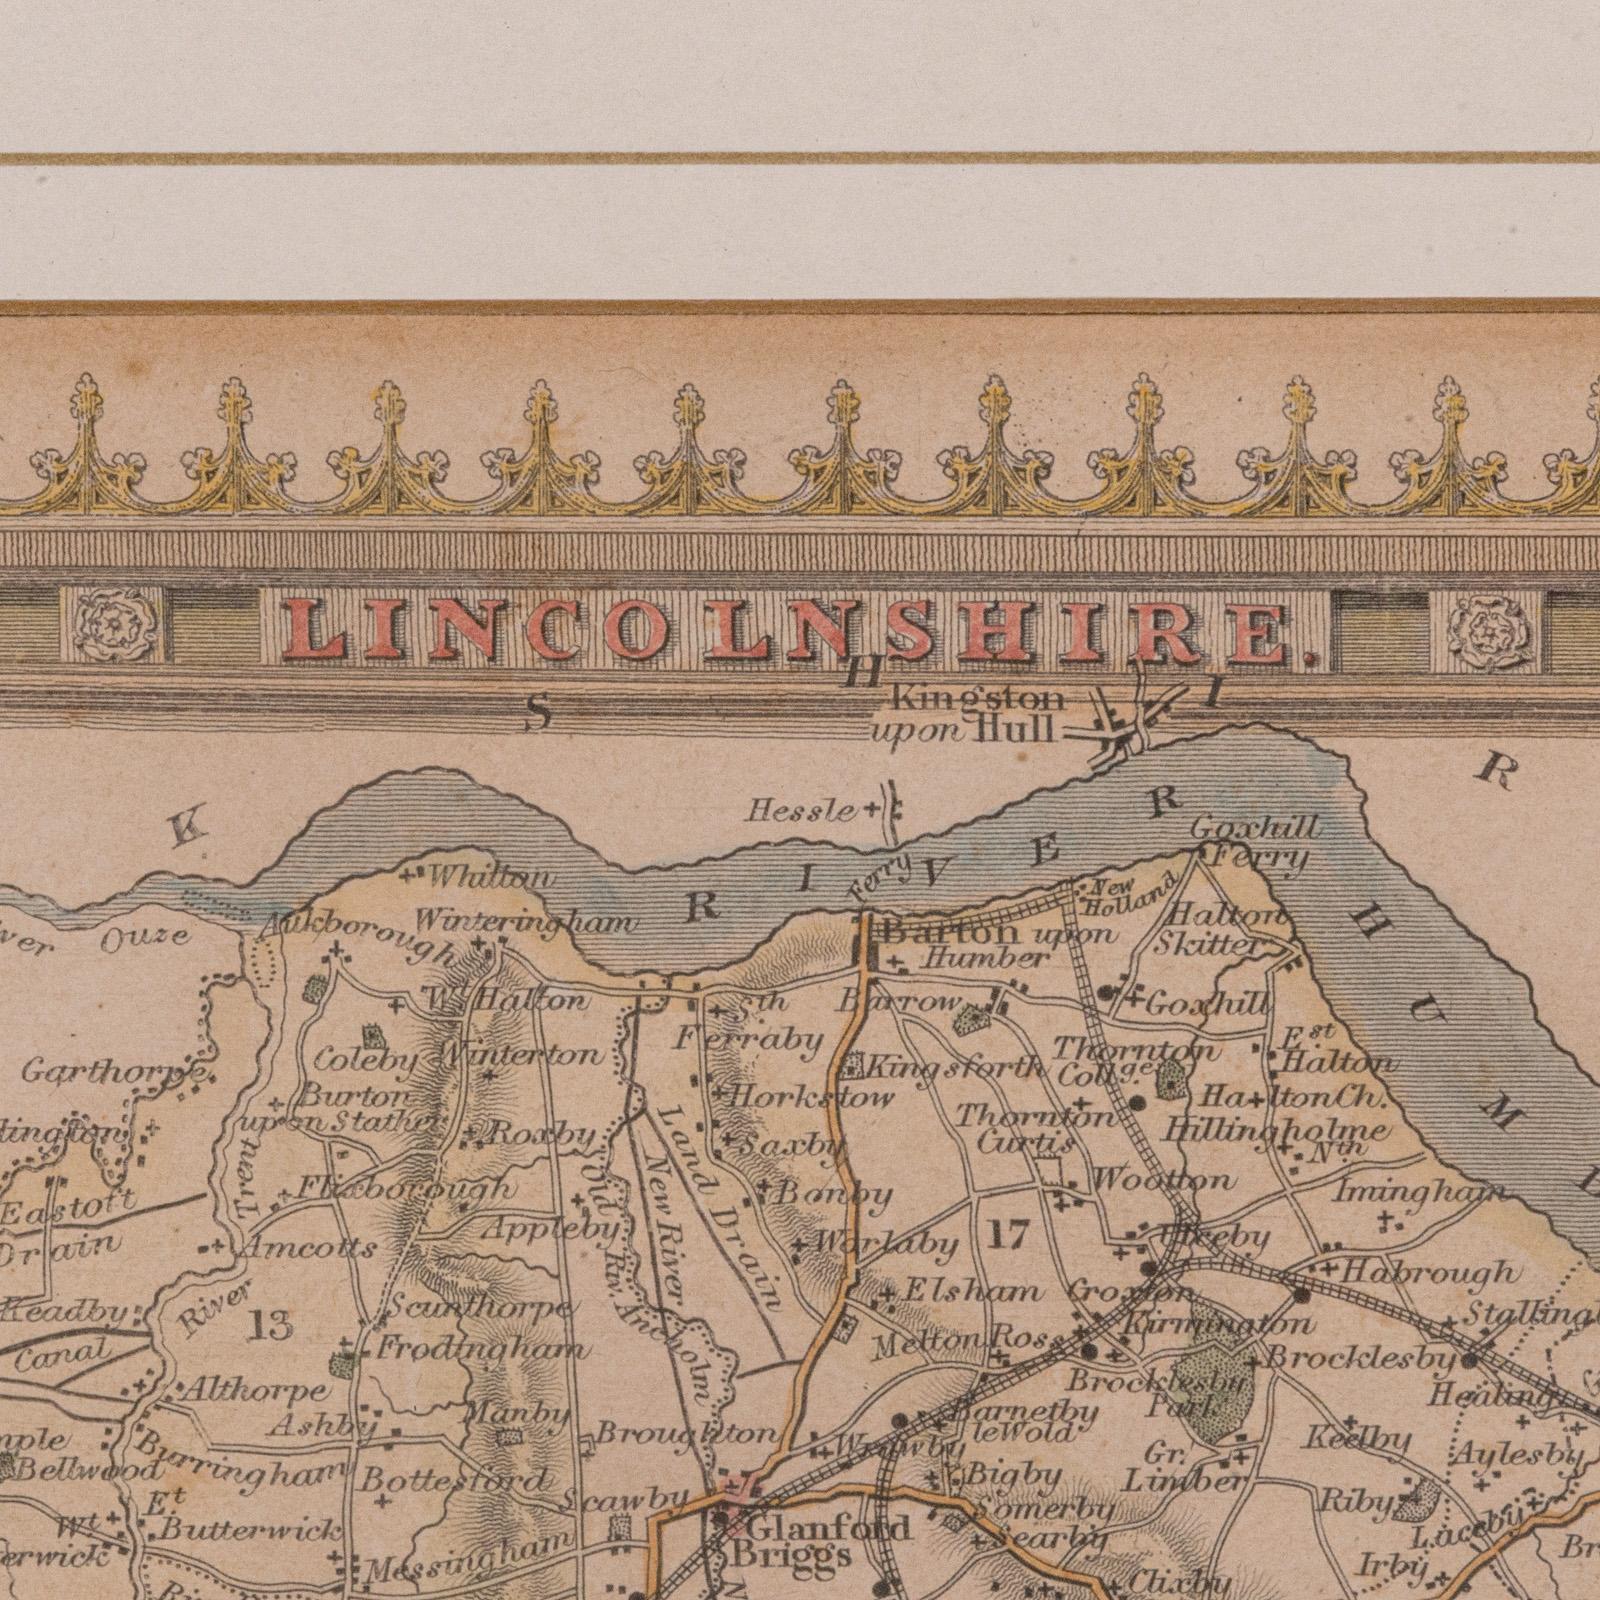 Wood Antique Lithography Map, Lincolnshire, English, Framed, Engraving, Cartography For Sale